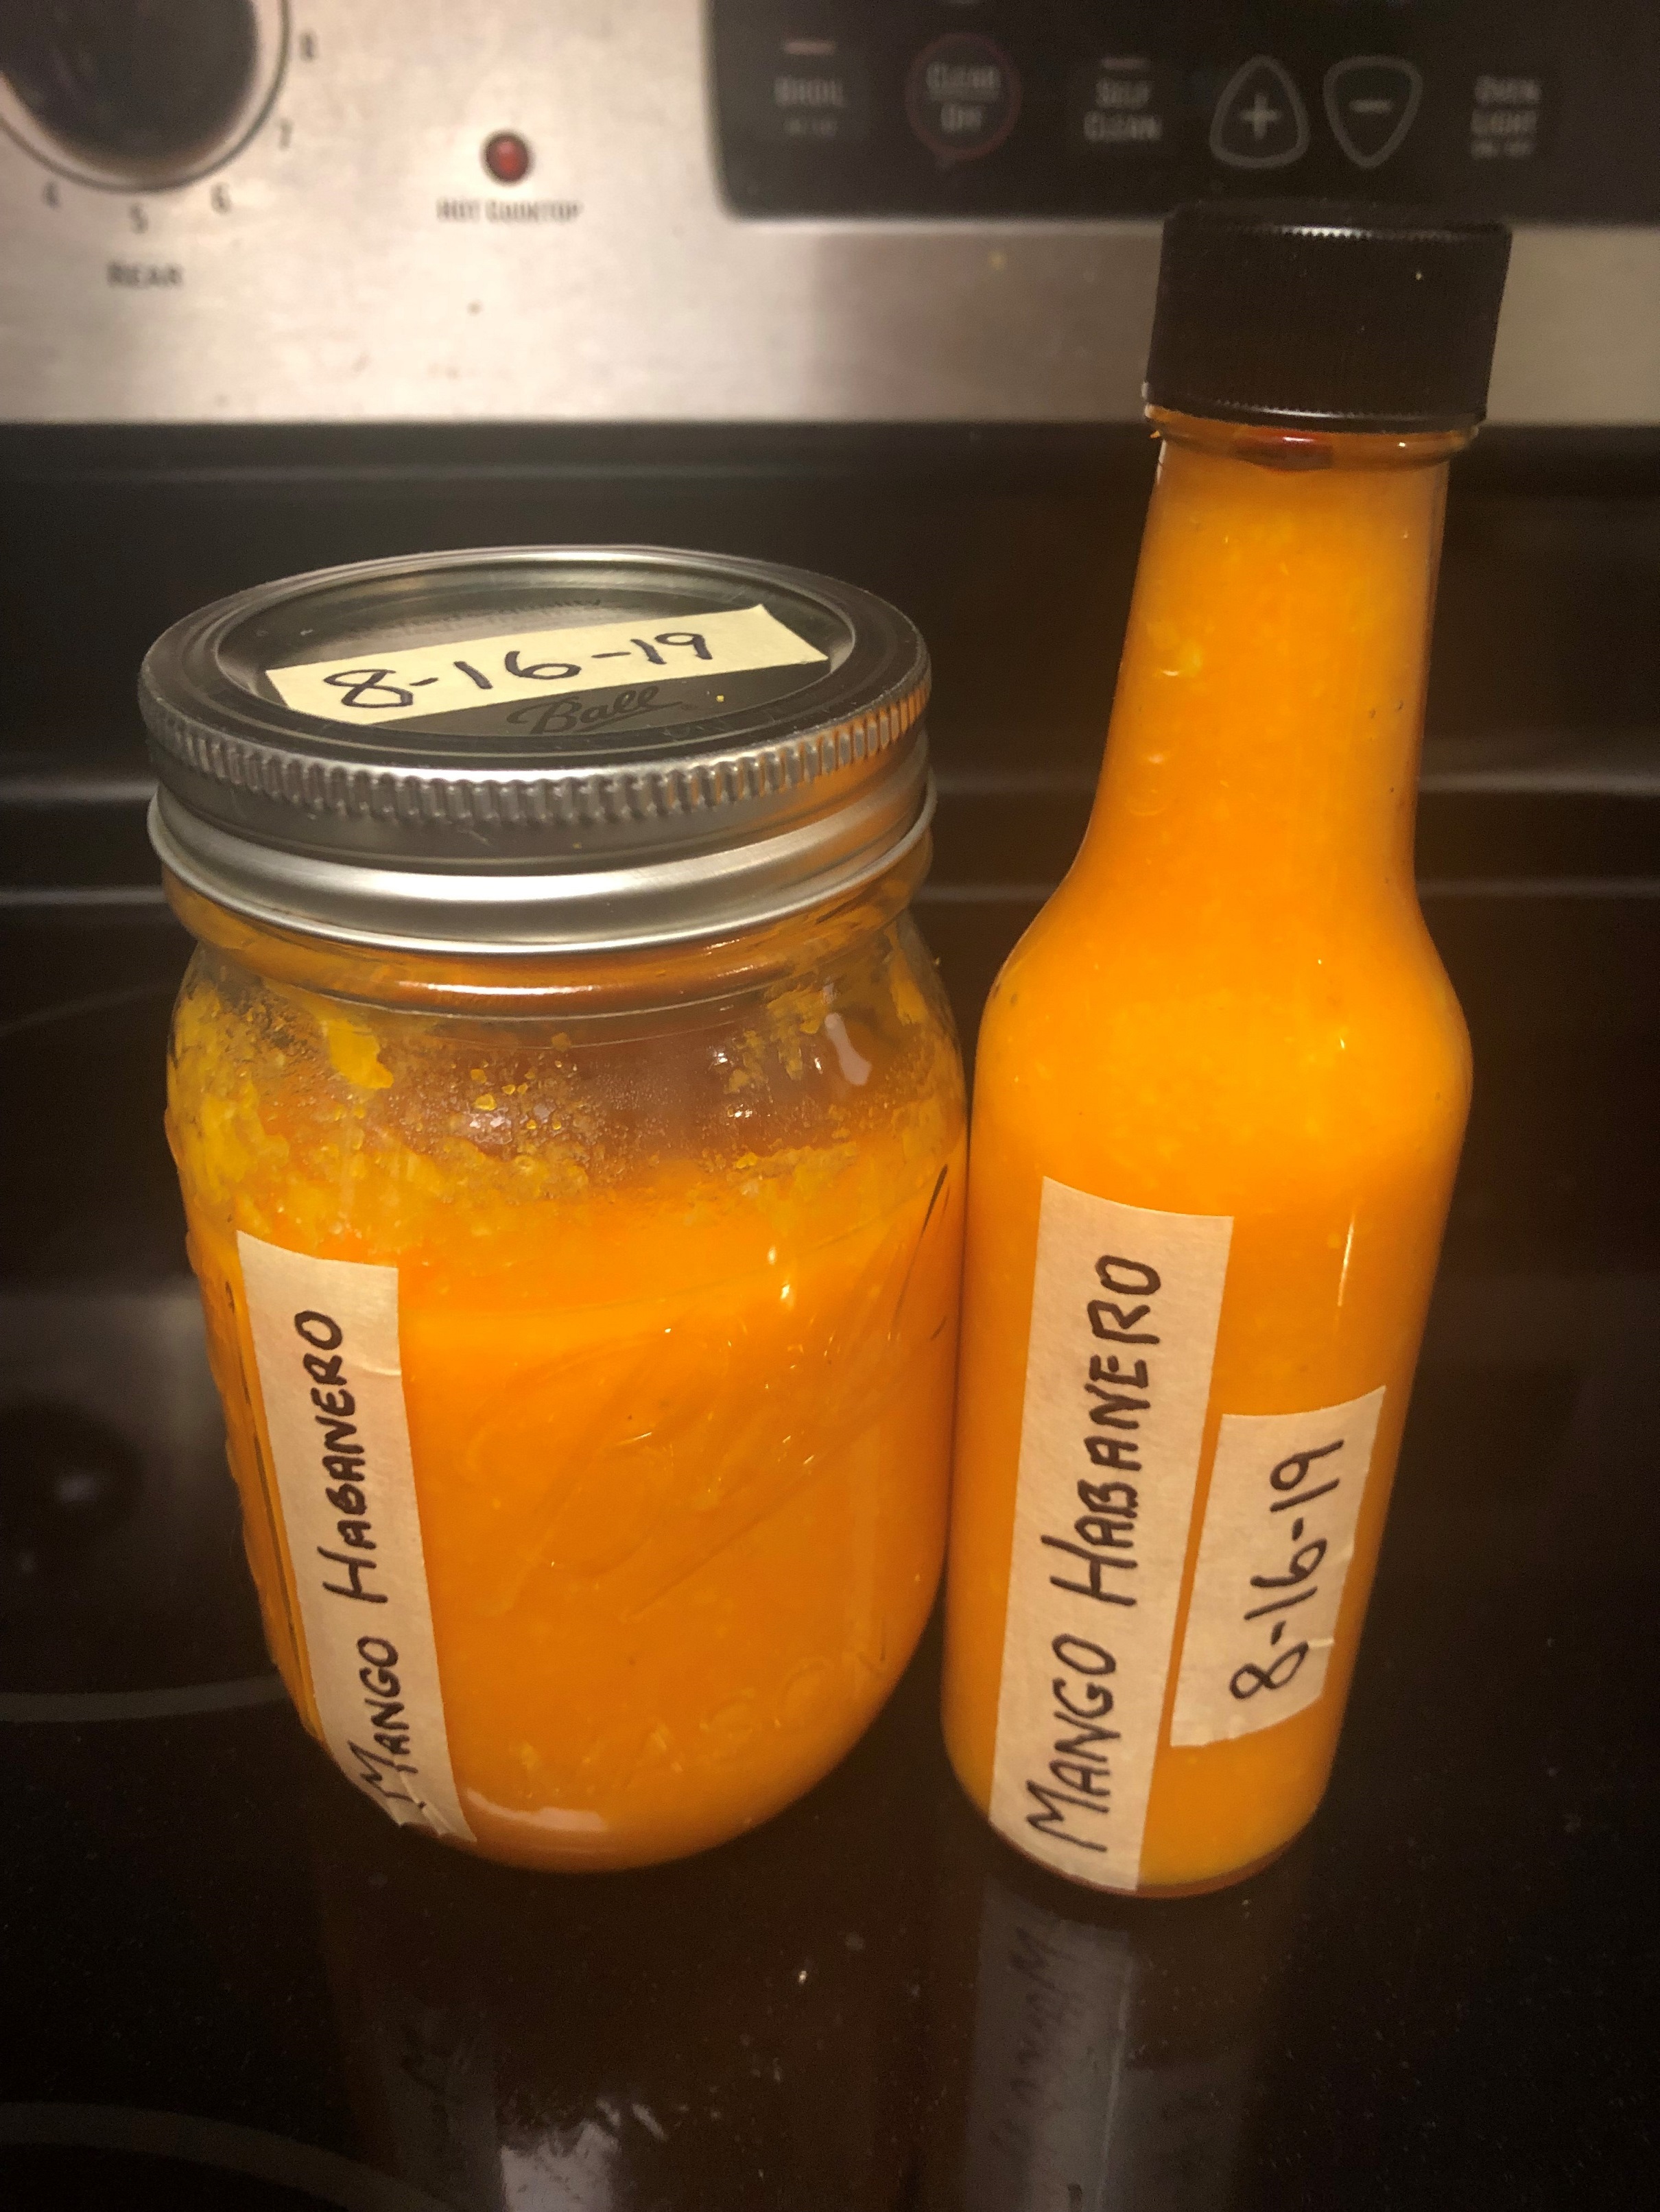 Bottled and labeled sauce on stove in a hot sauce bottle and mason jar